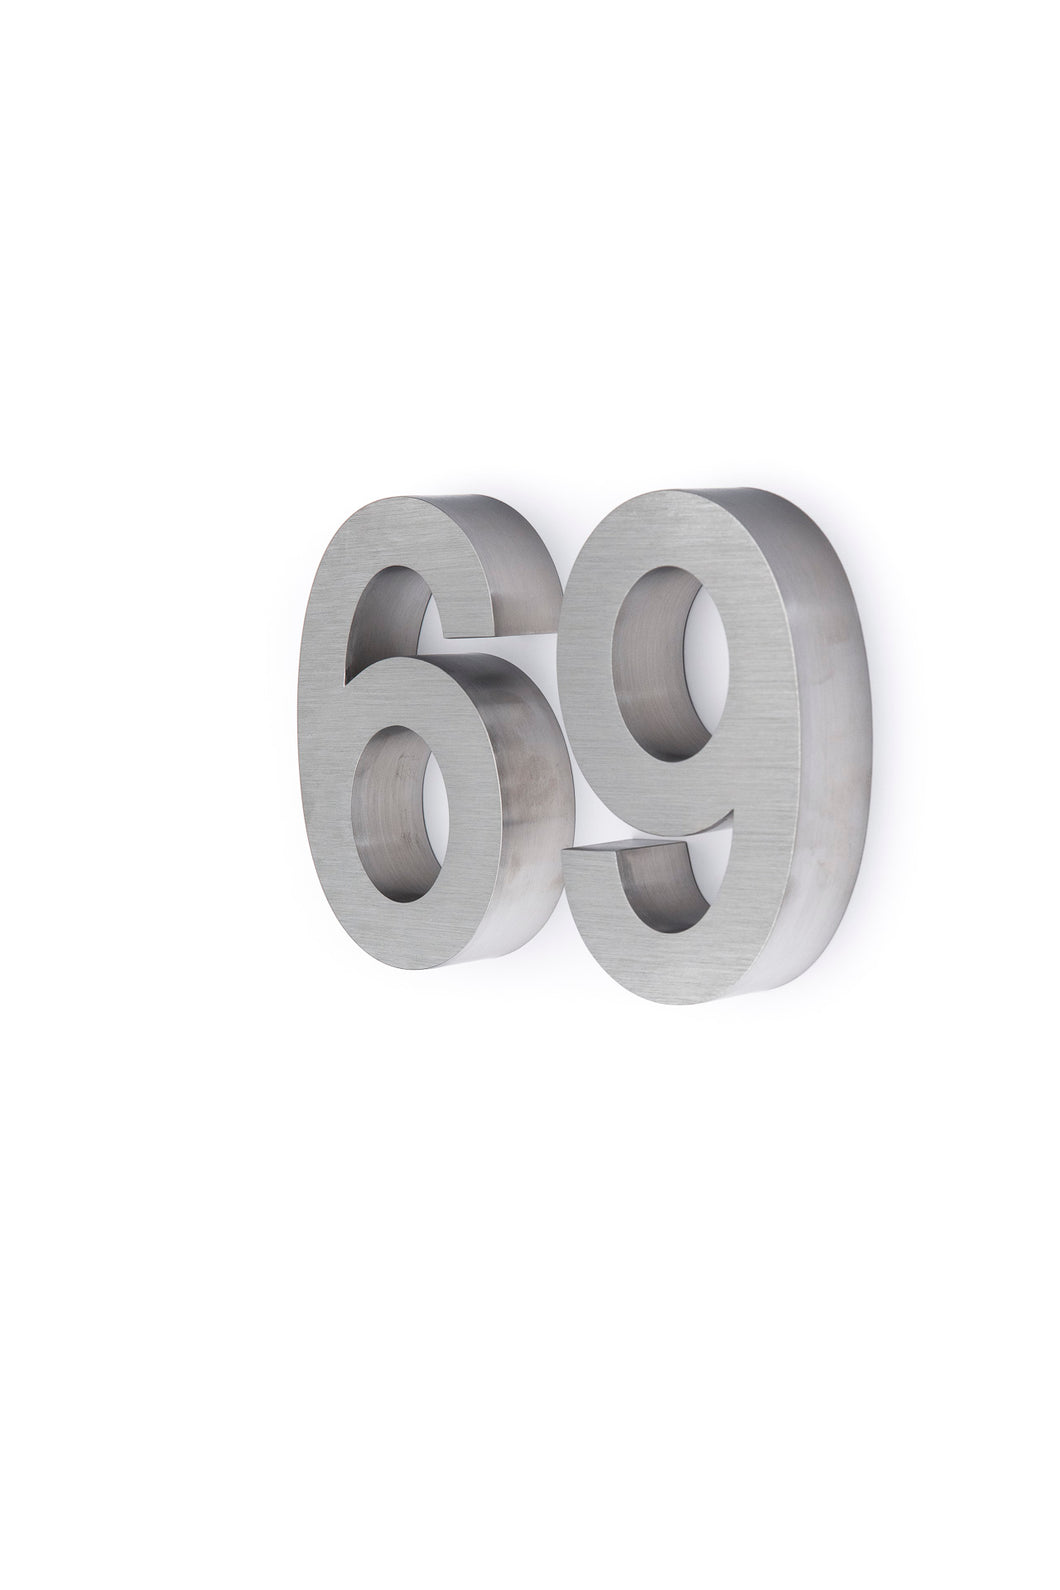 6 Inch 3D Stainless Steel House Number Six/Nine